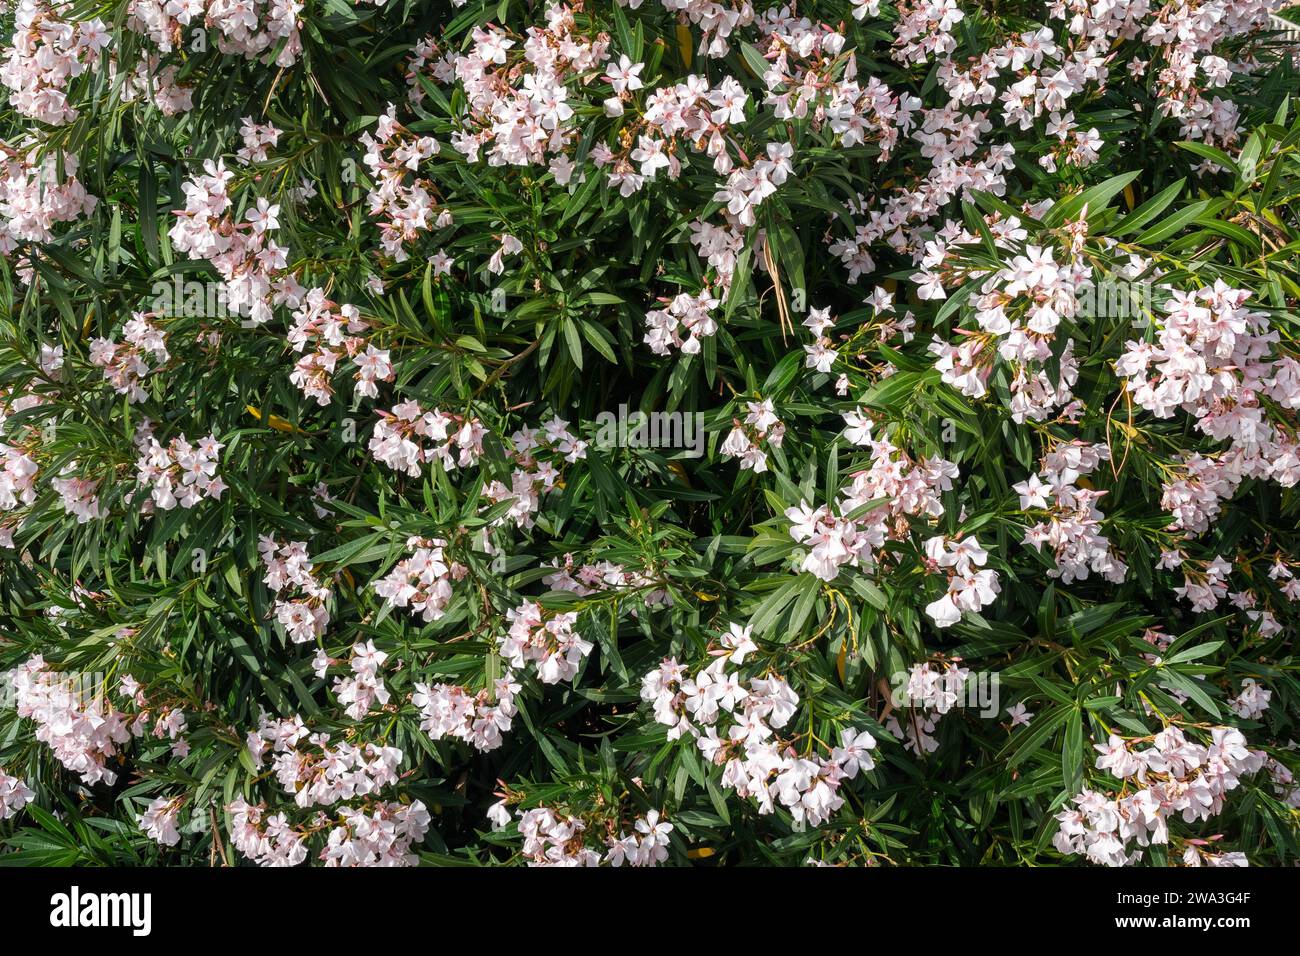 Close-up of a flowering plant of oleander (Nerium oleander), a shrub or small tree cultivated worldwide as an ornamental and landscaping plant Stock Photo